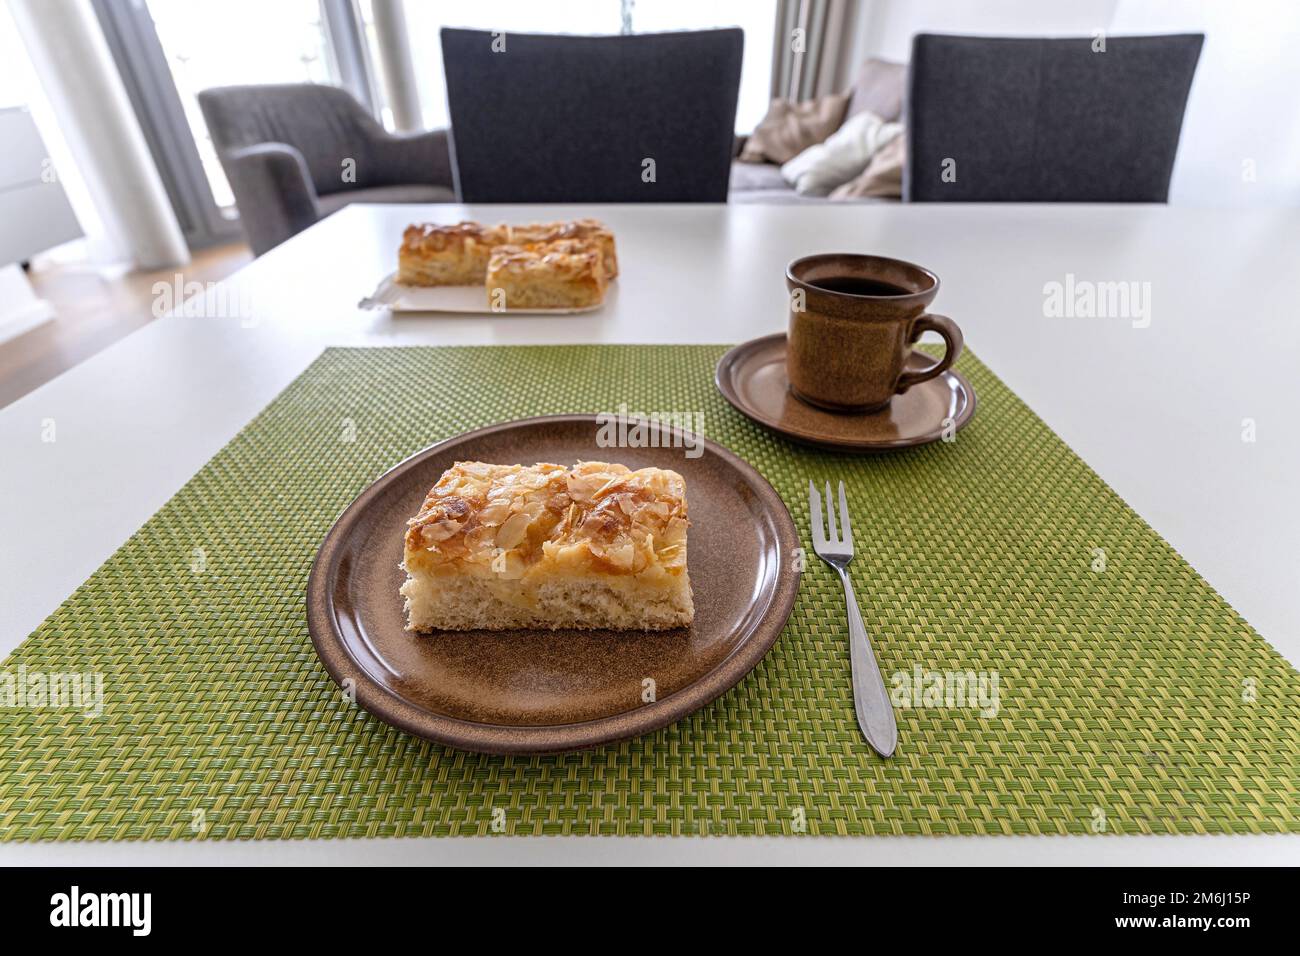 traditional North German Butterkuchen (butter cake) on dining table Stock Photo